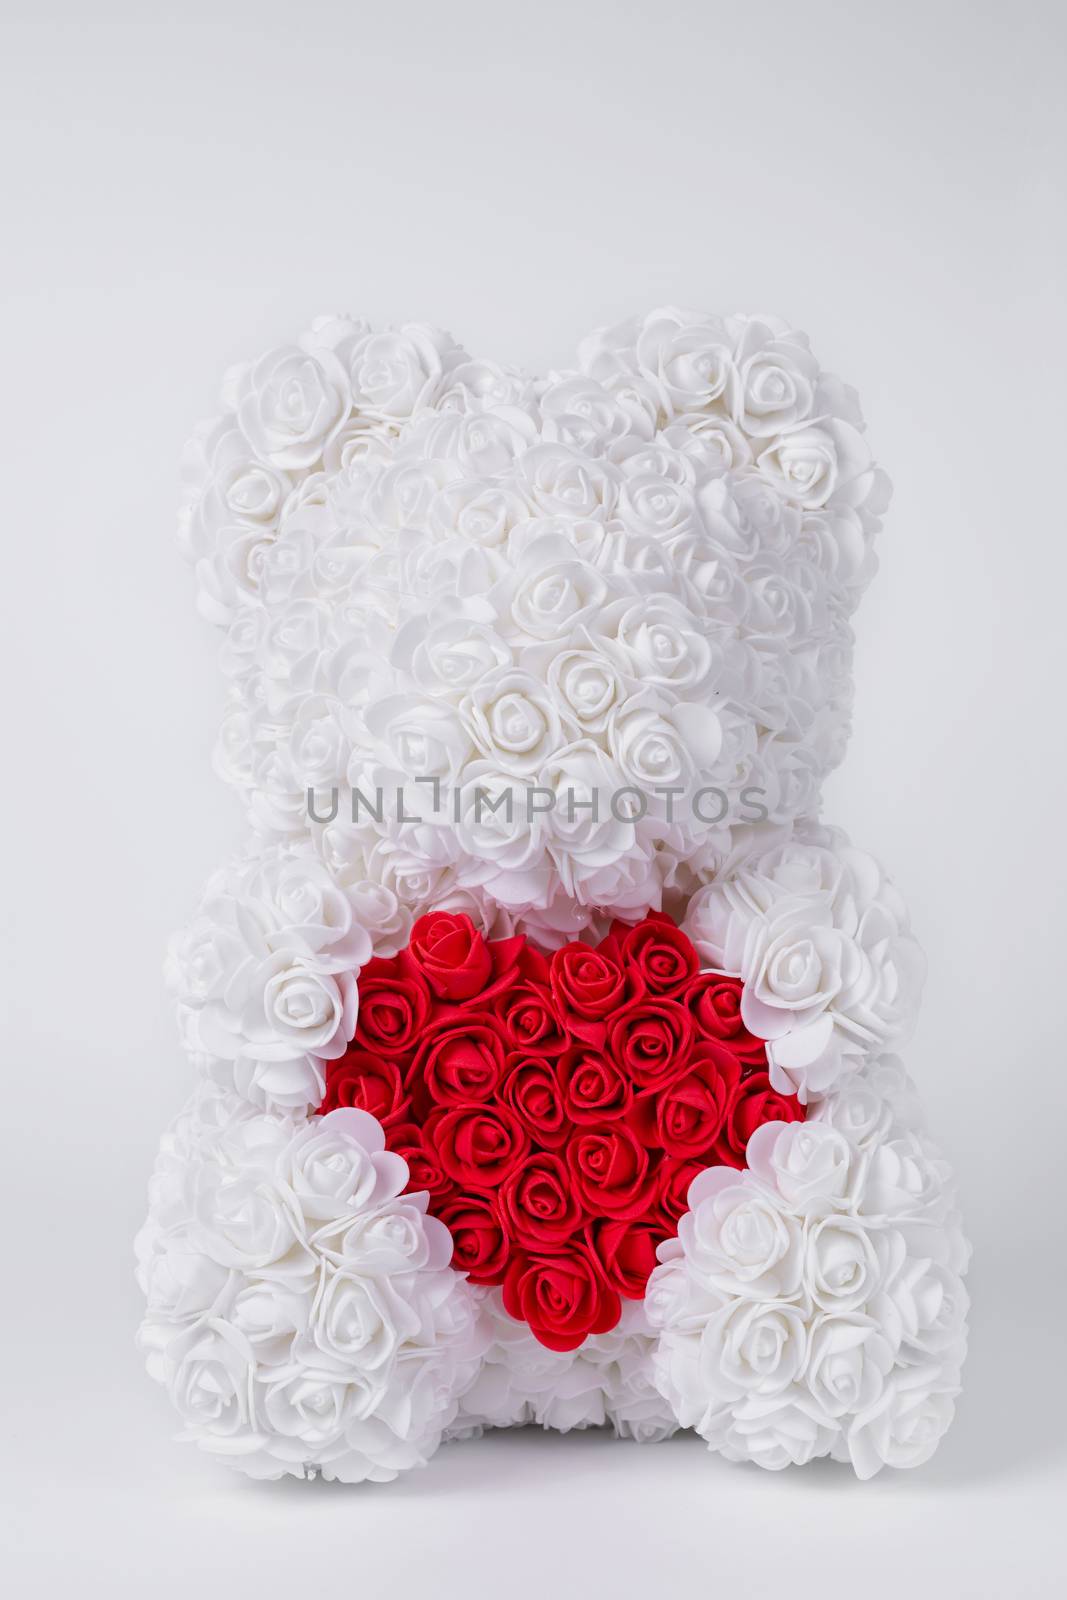 White  teddy bear of foamirane roses. White heart in teddy paws. Stock photo isolated on white background. Perfect gift for women holidays.